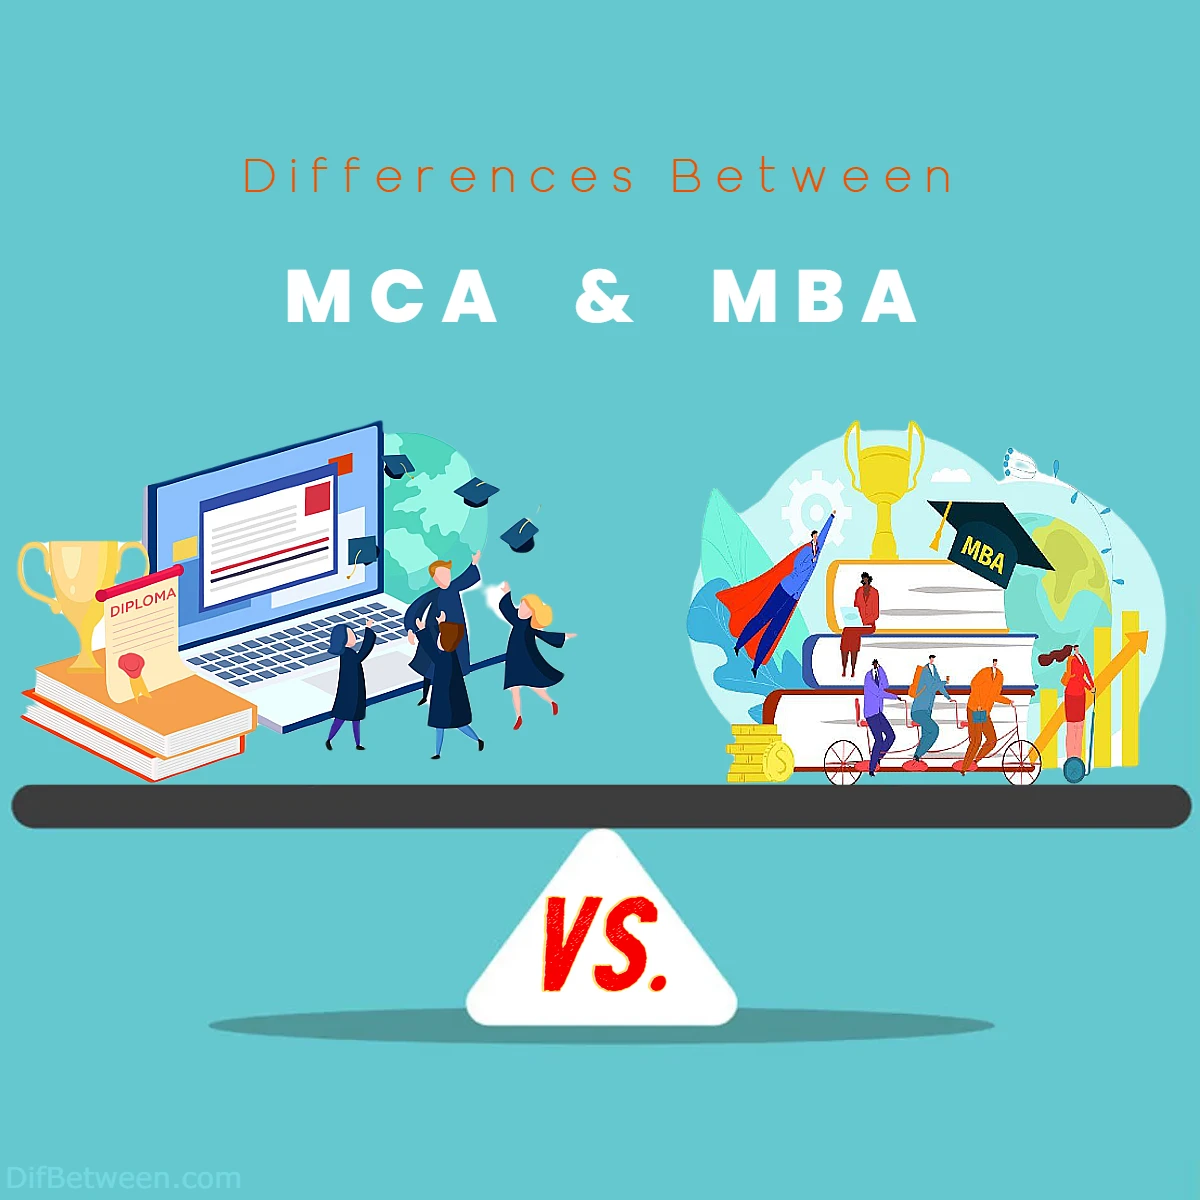 Differences Between MCA vs MBA